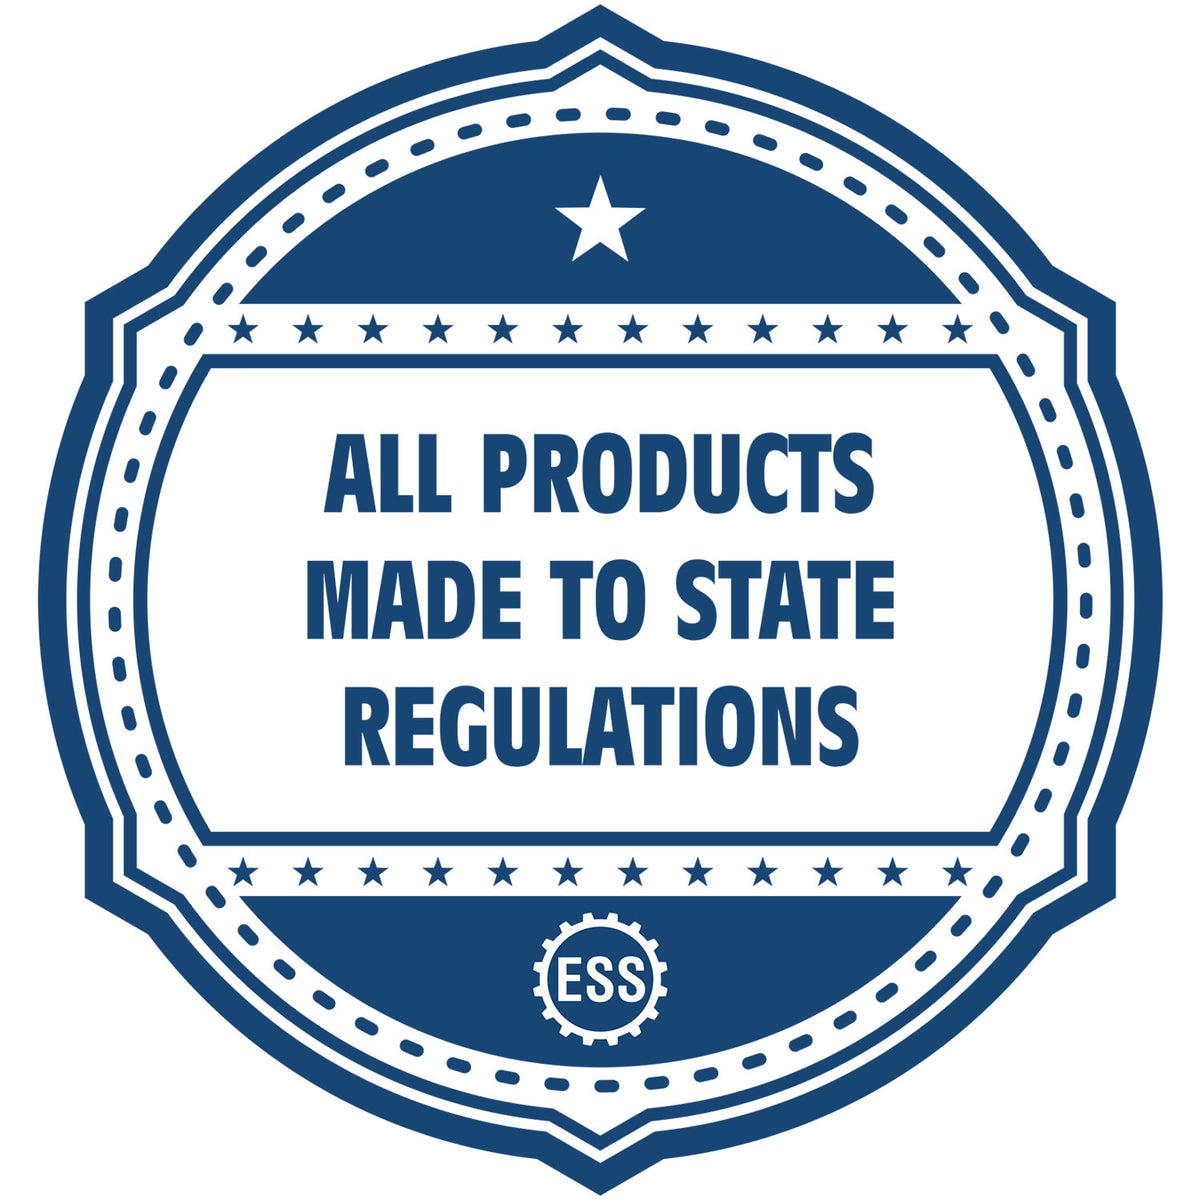 A blue icon or badge for the Gift Nebraska Engineer Seal showing that this product is made in compliance with state regulations.